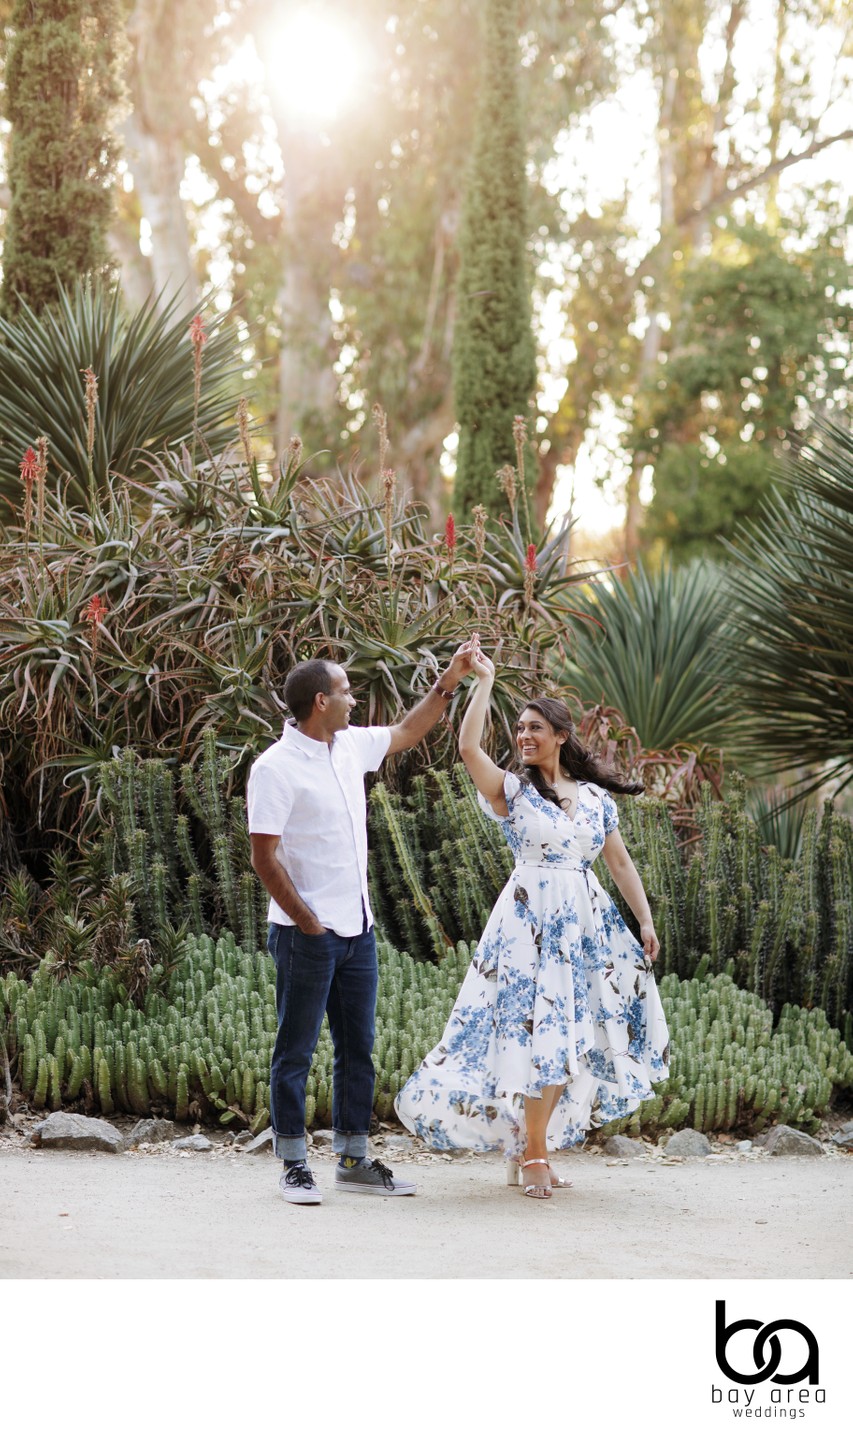 Best Indian Engagement Photographer in the Bay Area